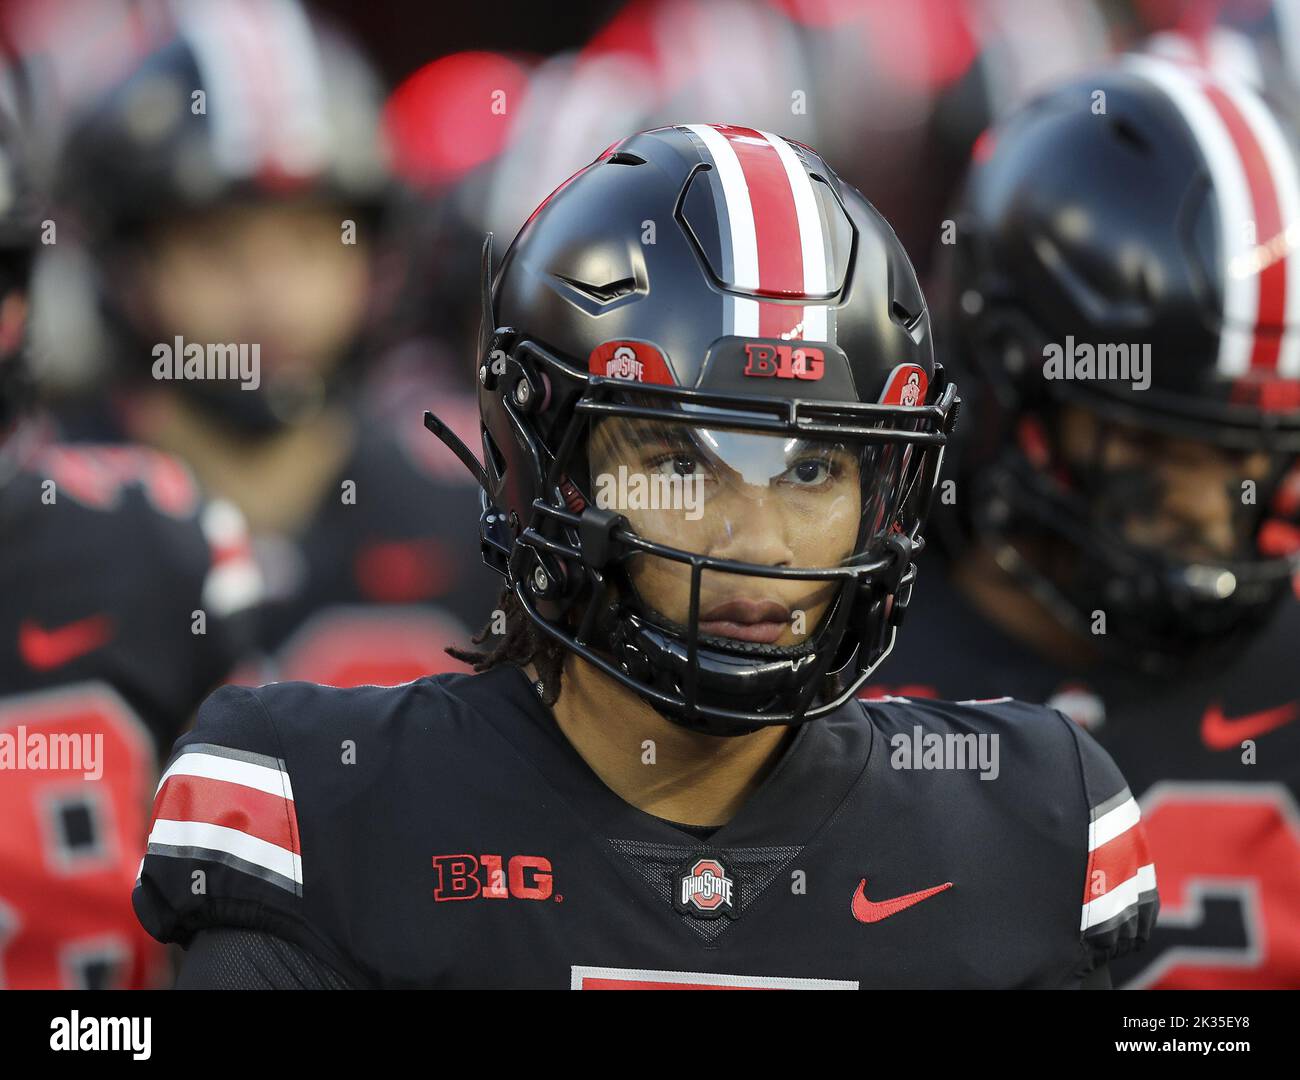 Columbus, United States. 24th Sep, 2022. The Ohio State Buckeyes quarterback C.J. Stroud prepares to take the field against the Wisconsin Badgers in Columbus, Ohio on Saturday, September 24, 2022. Photo by Aaron Josefczyk/UPI Credit: UPI/Alamy Live News Stock Photo